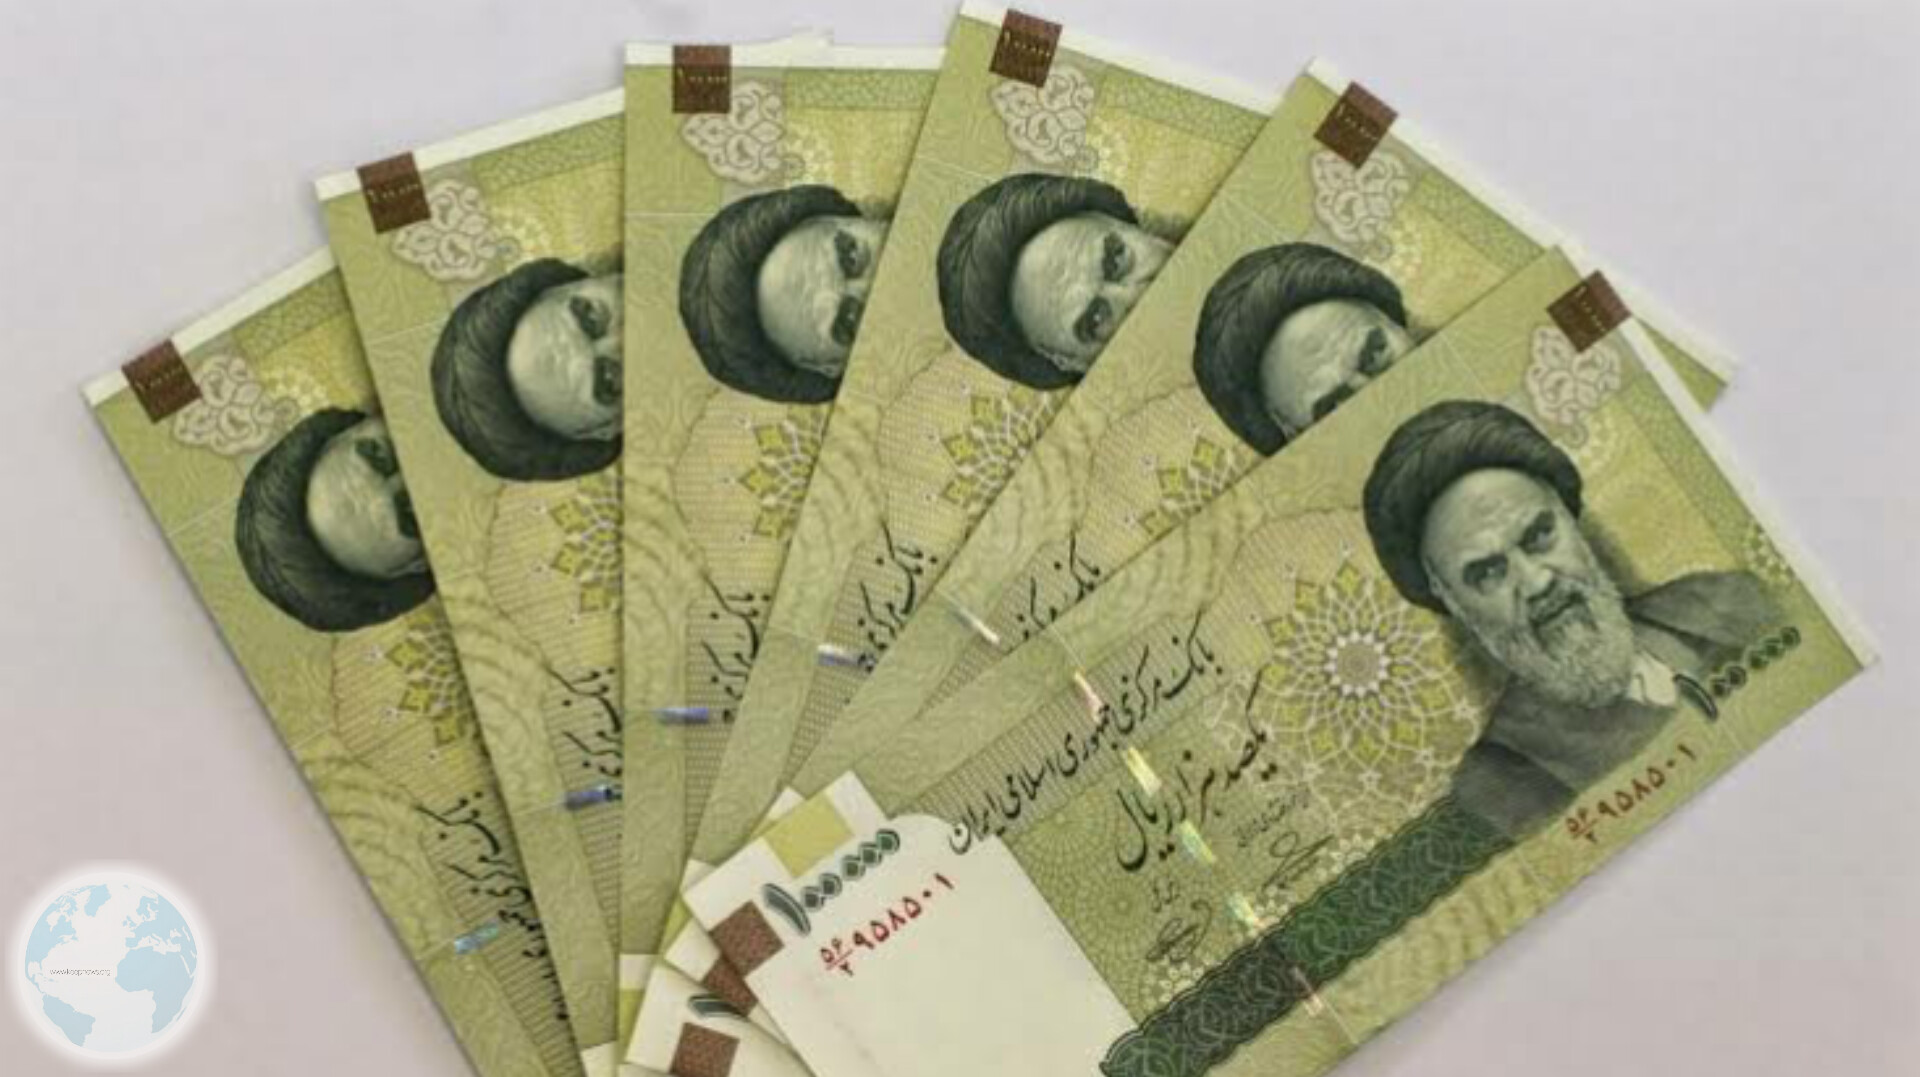 Historical Decline in Iranian Currency, 1 dollar has Gone to Millions of Rupees